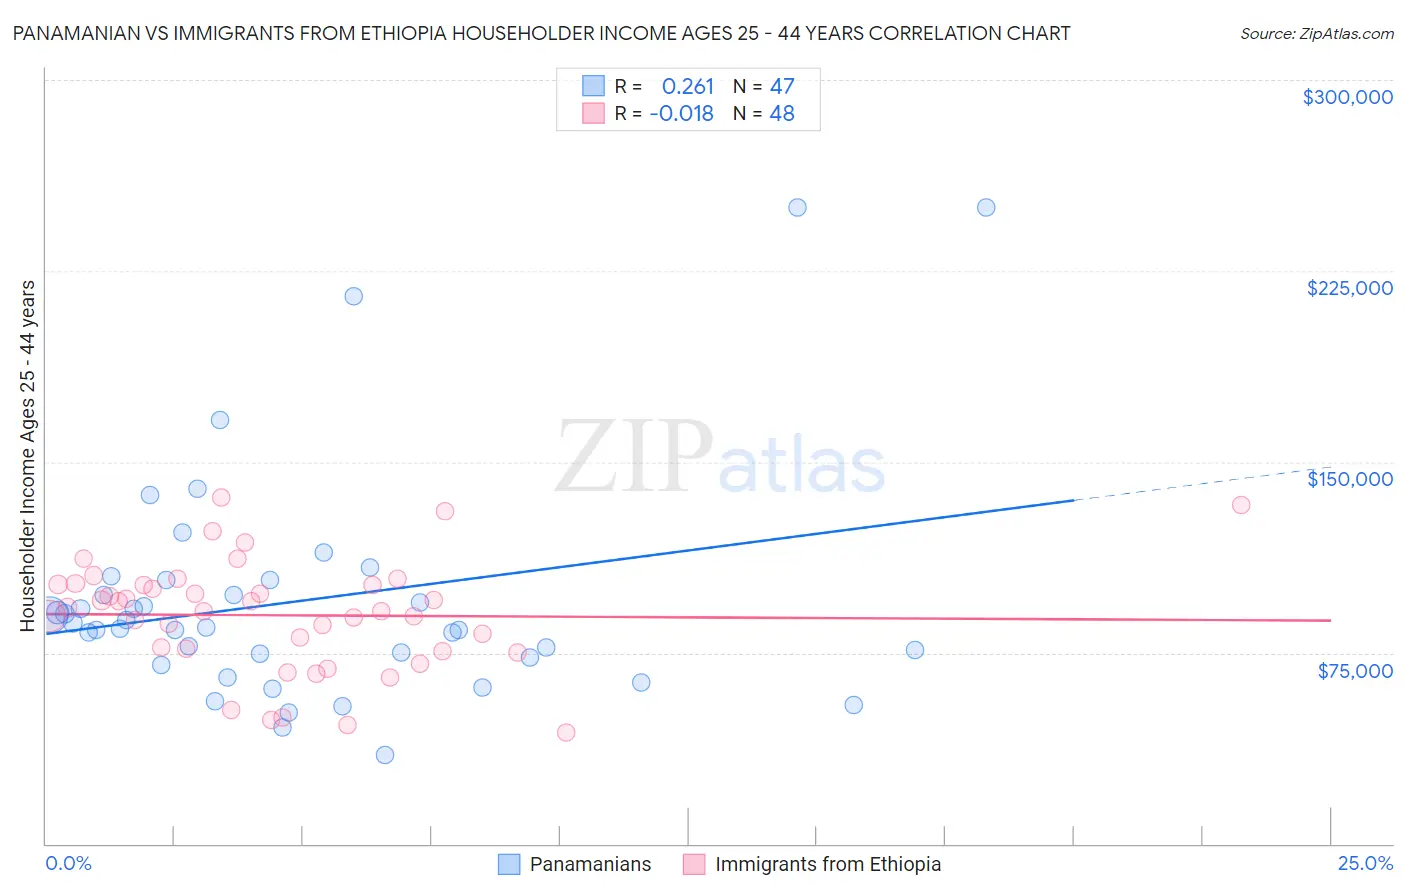 Panamanian vs Immigrants from Ethiopia Householder Income Ages 25 - 44 years